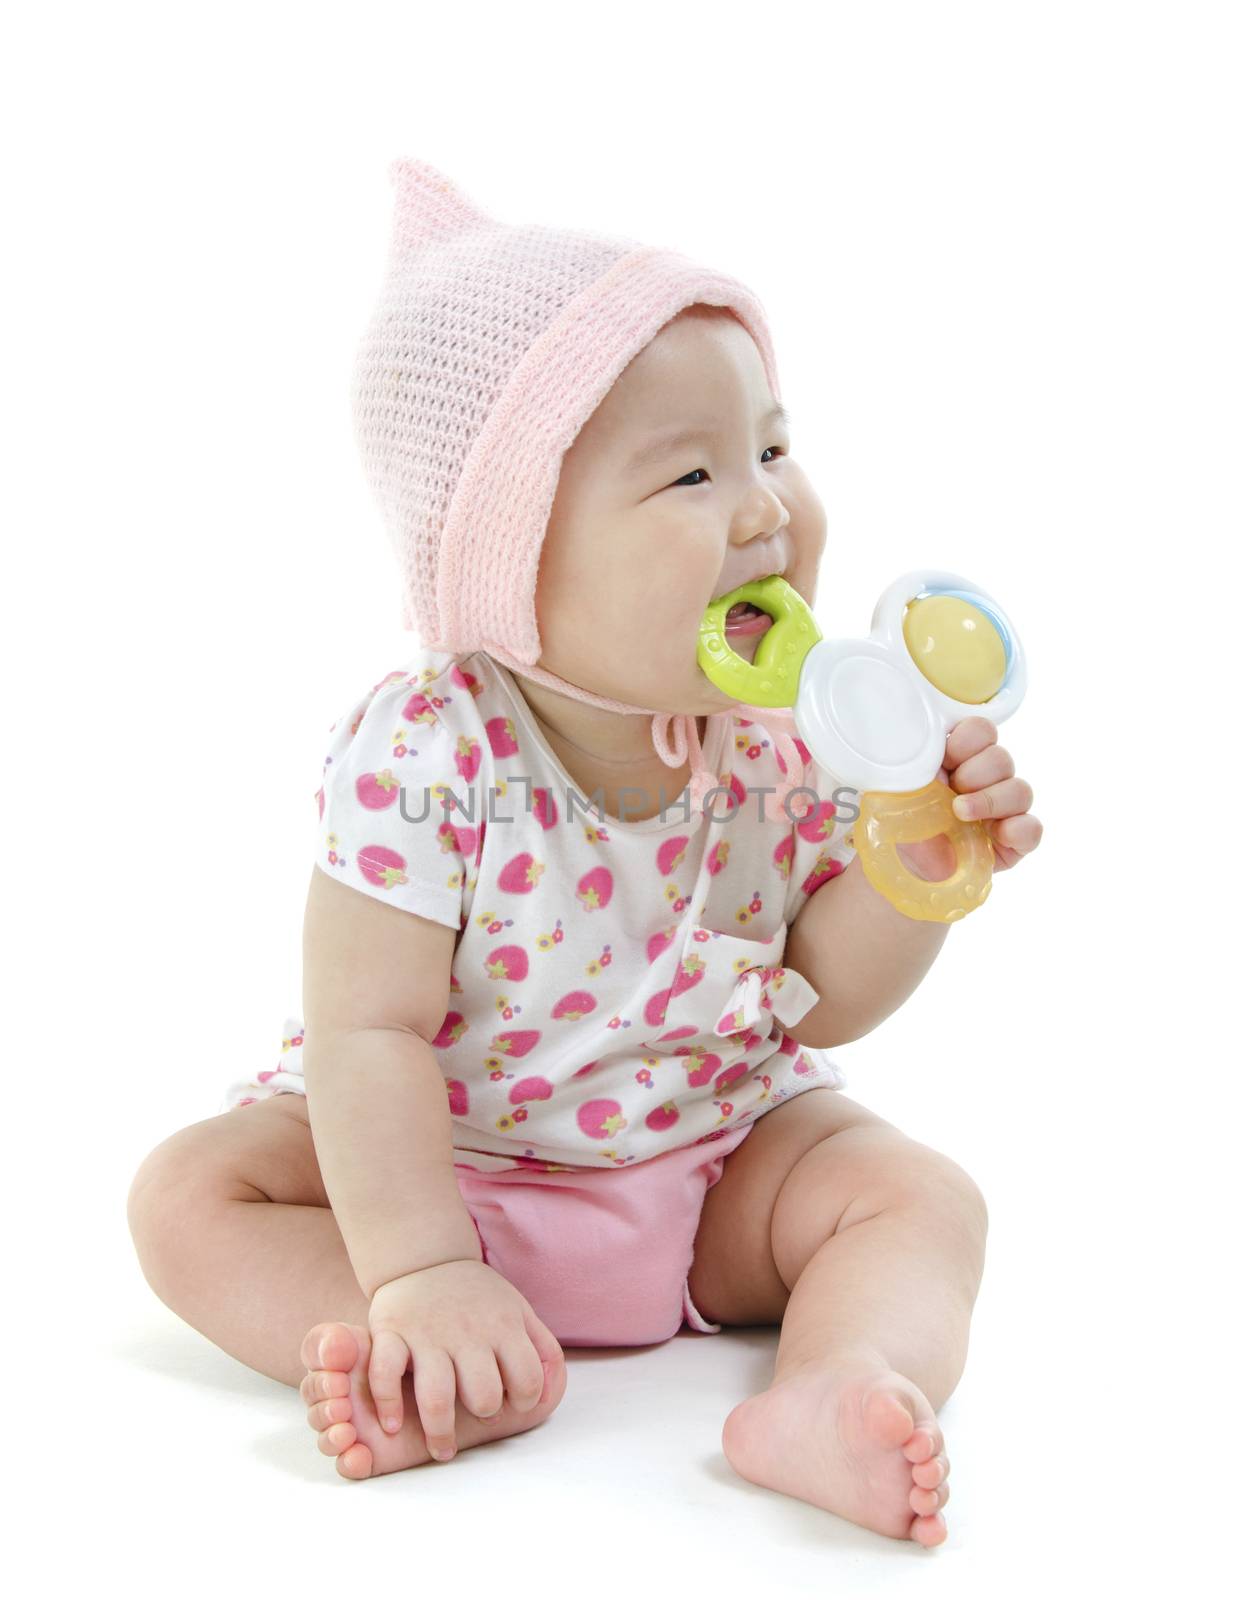 Portrait of full length beautiful Asian baby girl in pink clothes biting teether toy, isolated on white background.